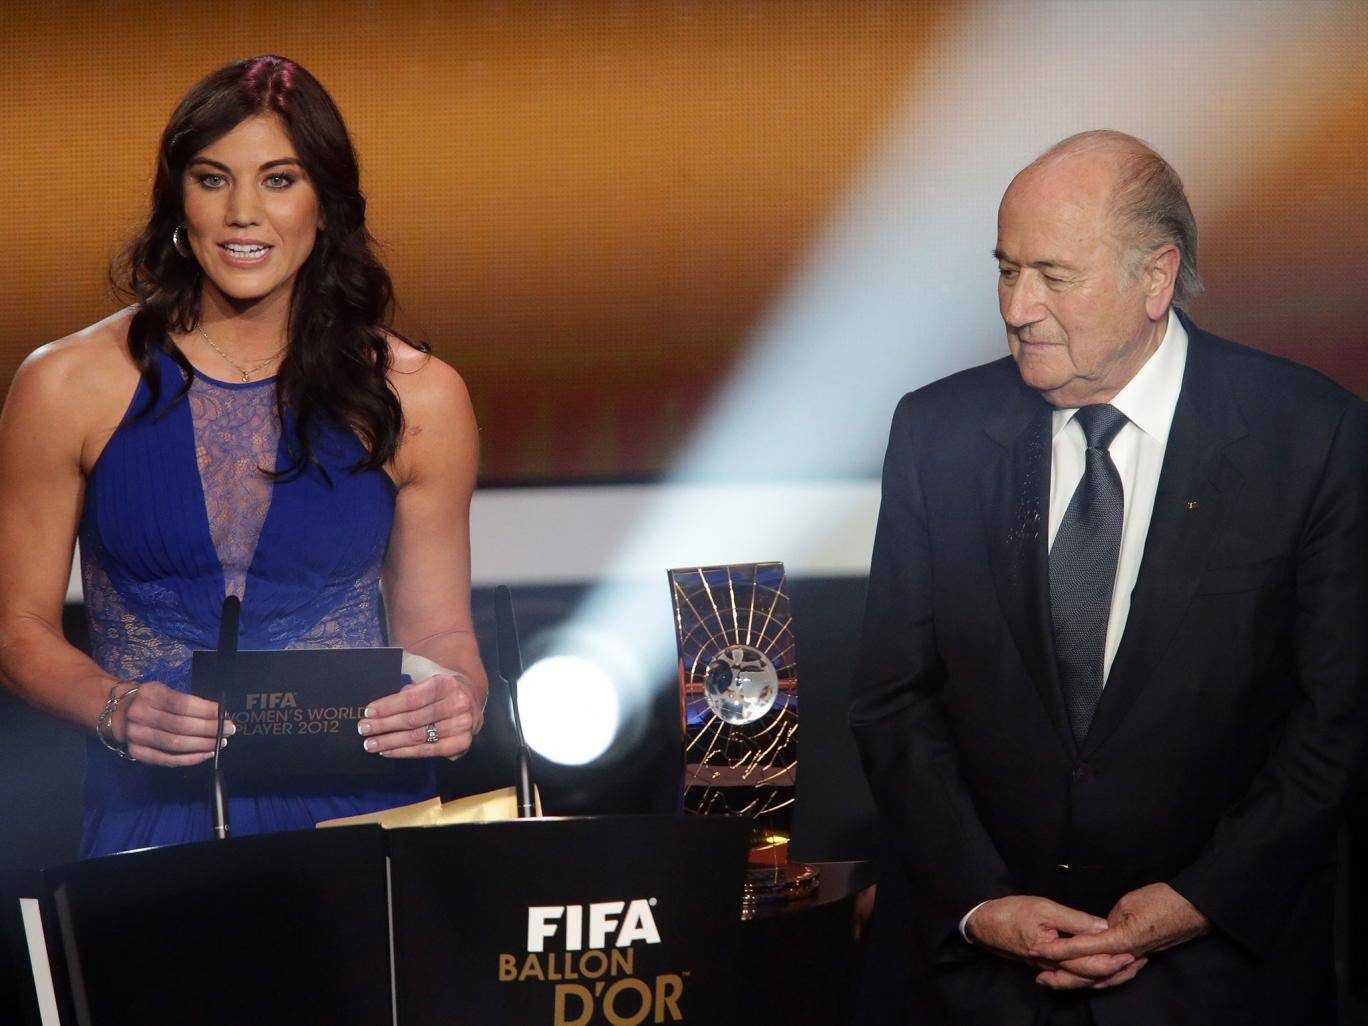 Former Fifa president Sepp Blatter has been accused of sexually assaulting Hope Solo, the USA women's football team goalkeeper, at the Ballon d'Or awards ceremony in January 2013.